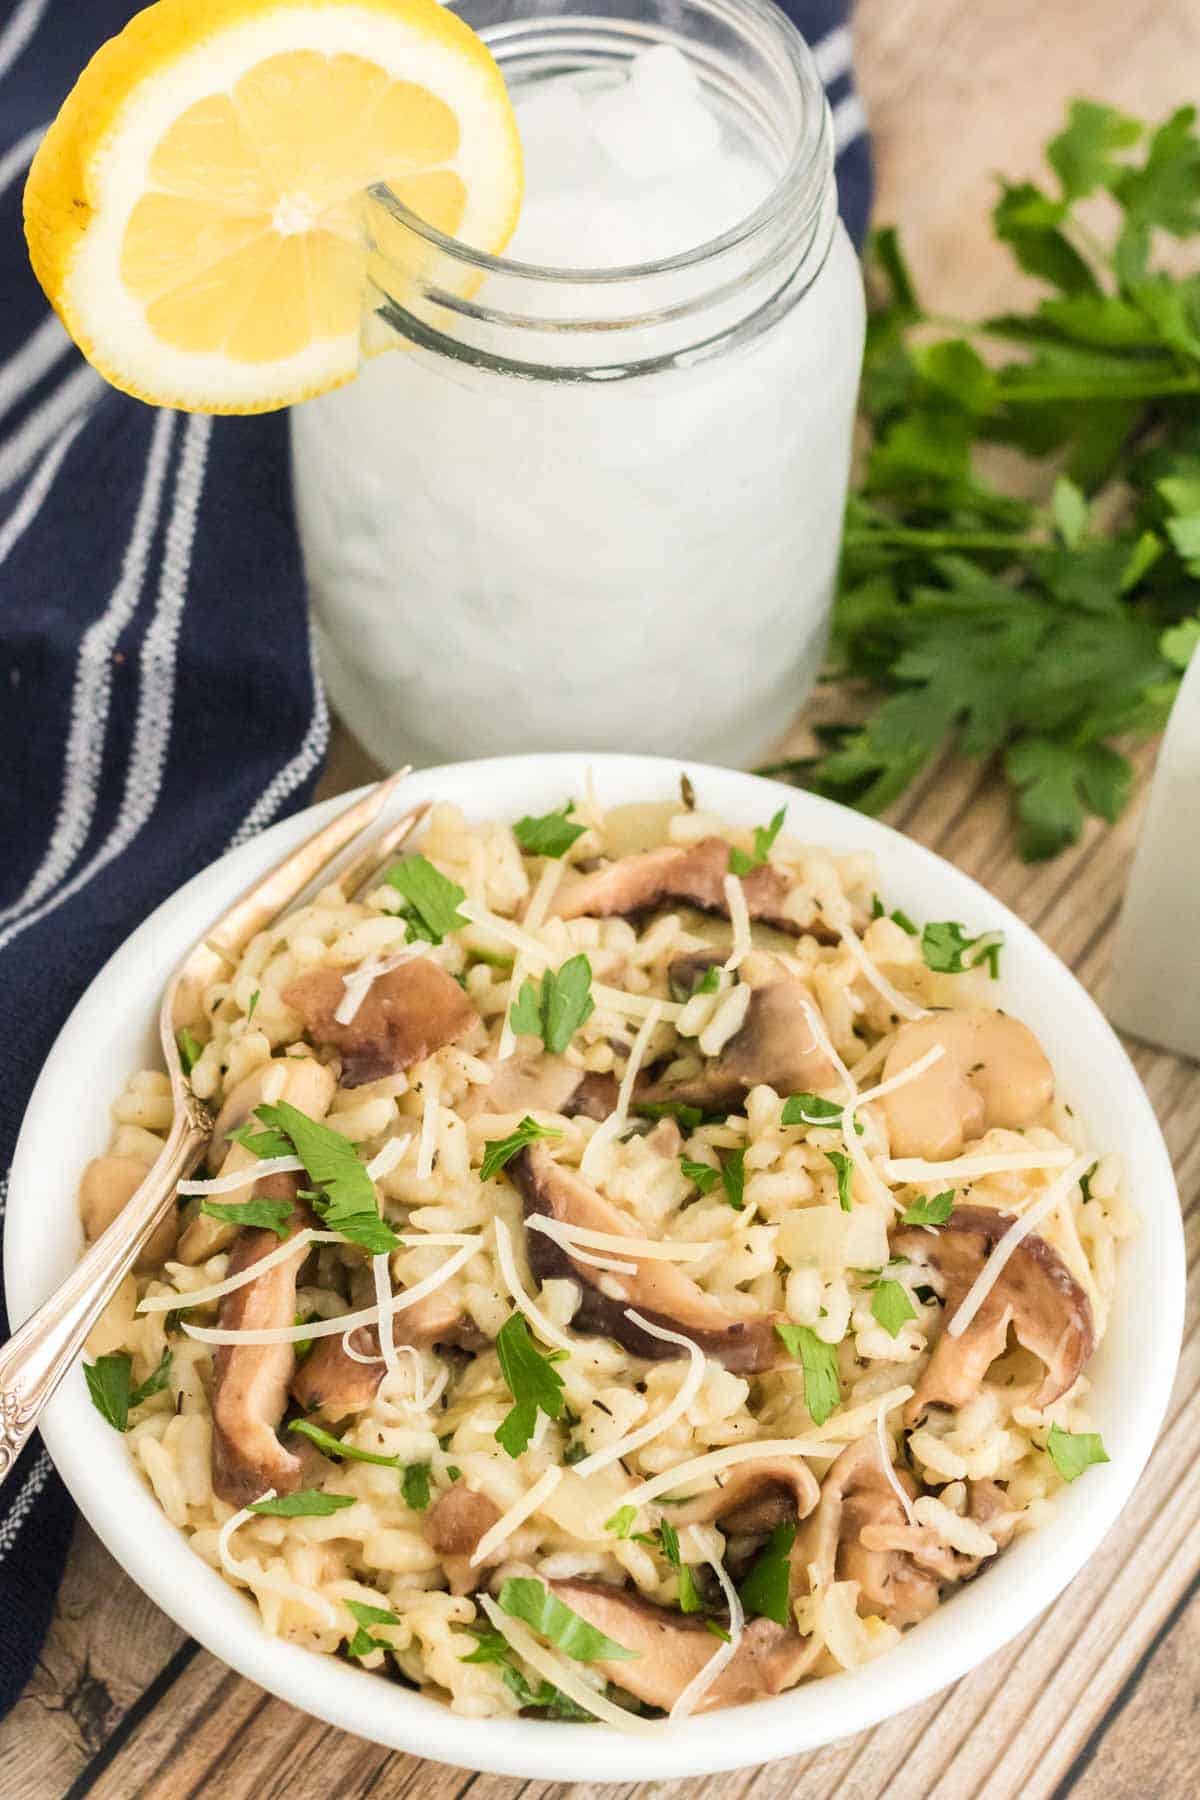 Overhead view of a bowl of Instant Pot mushroom risotto next to a glass of lemonade garnished with a lemon wedge.